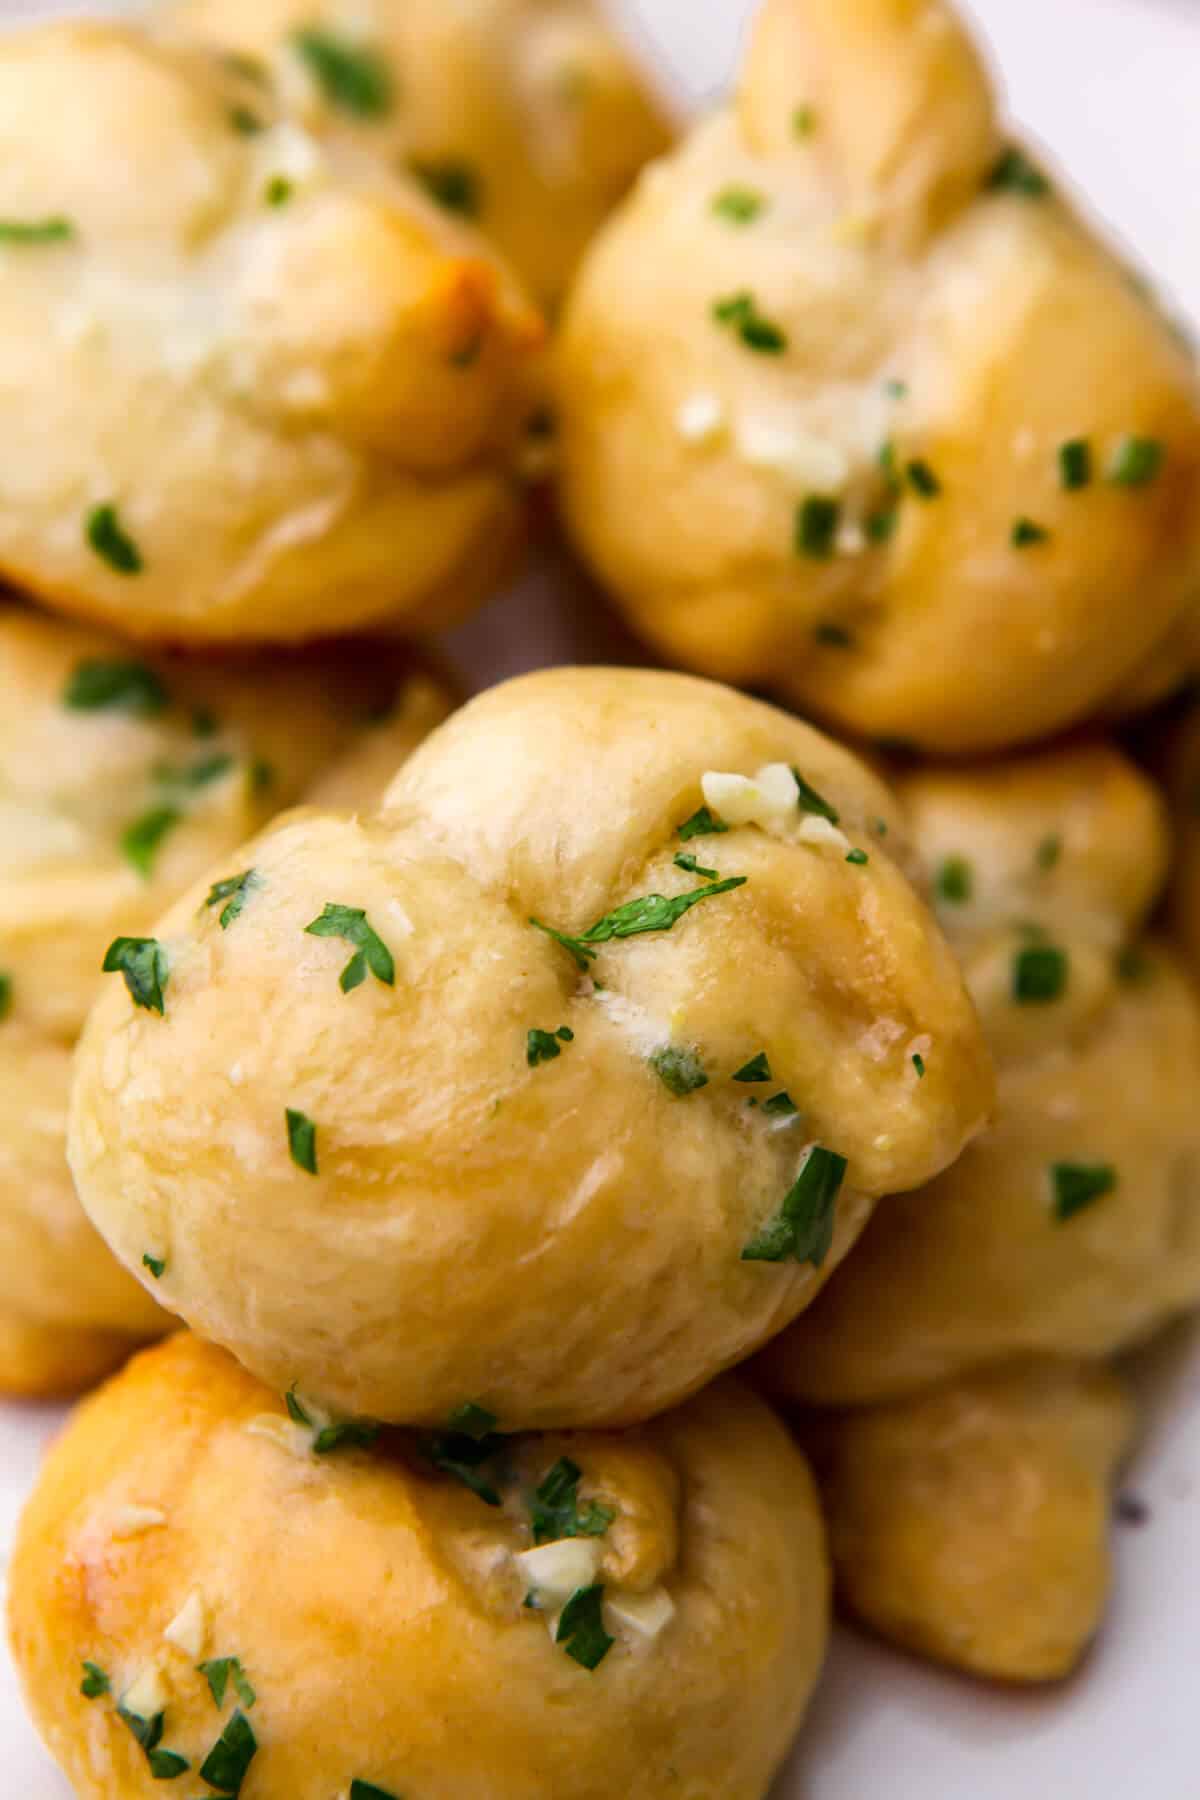 A close up of garlic knots stacked on a plate.